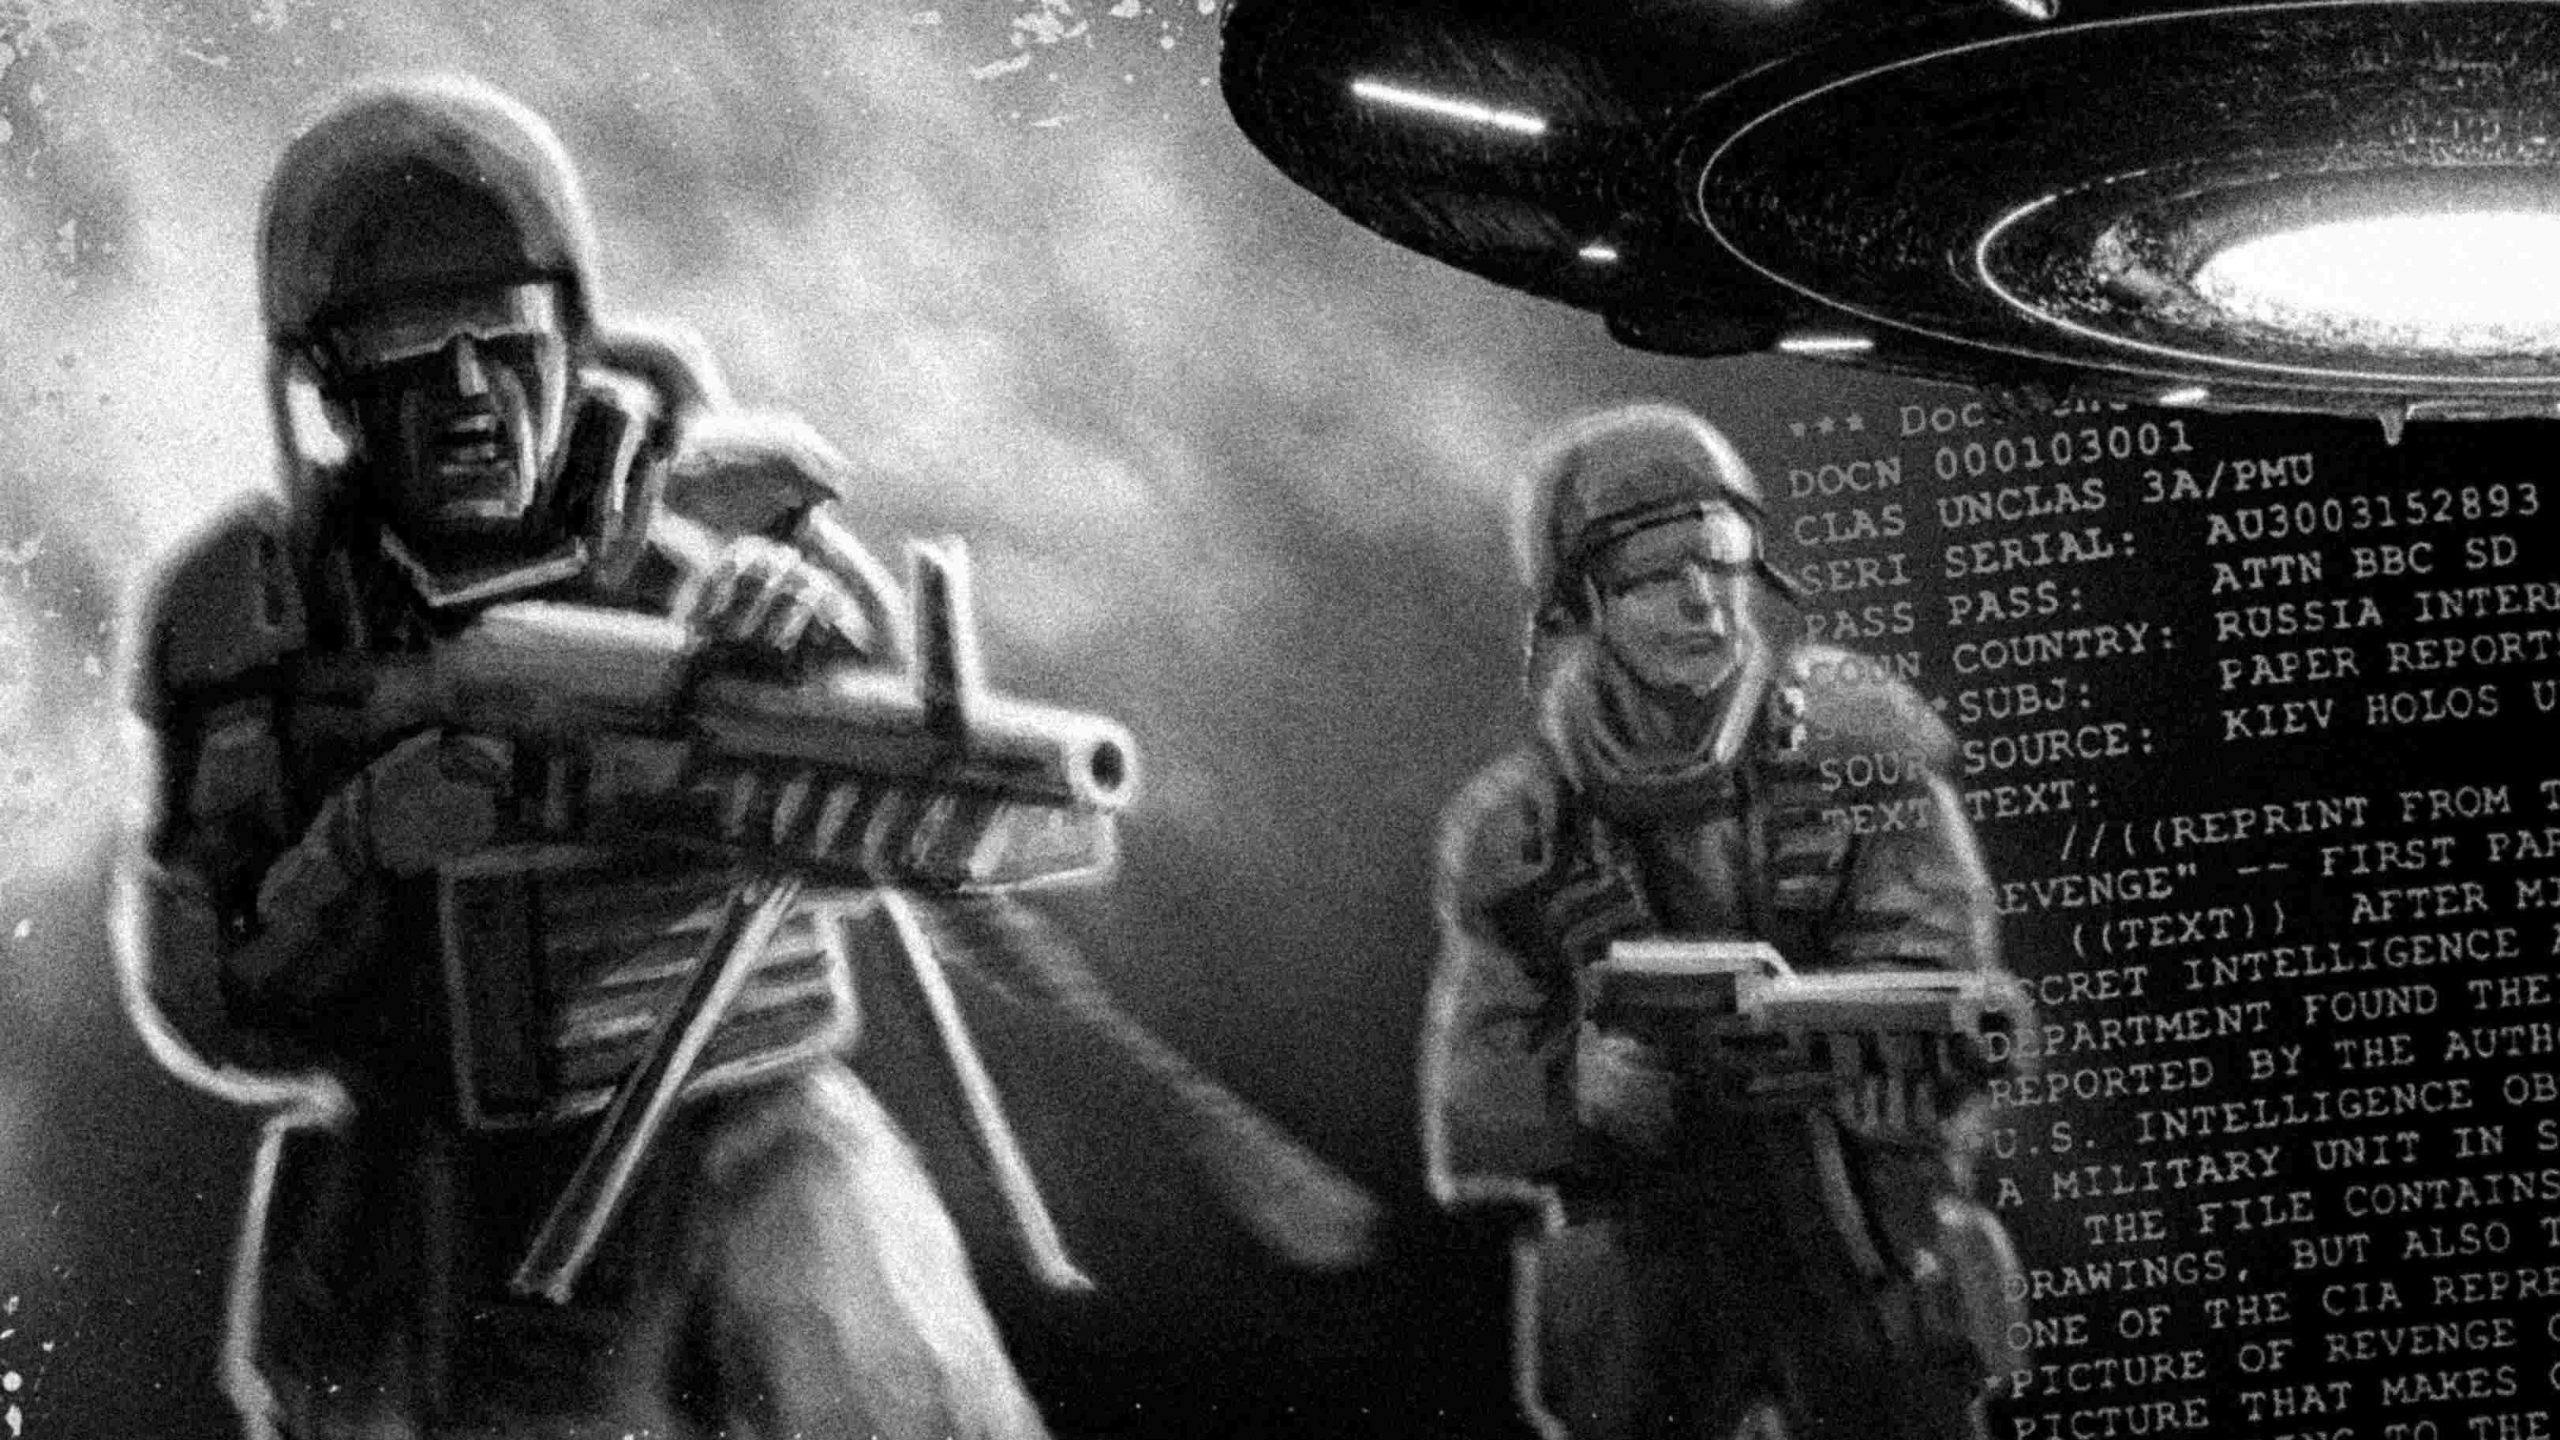 "23 Russian soldiers were turned to stone" after alien attack – CIA document revealed 1